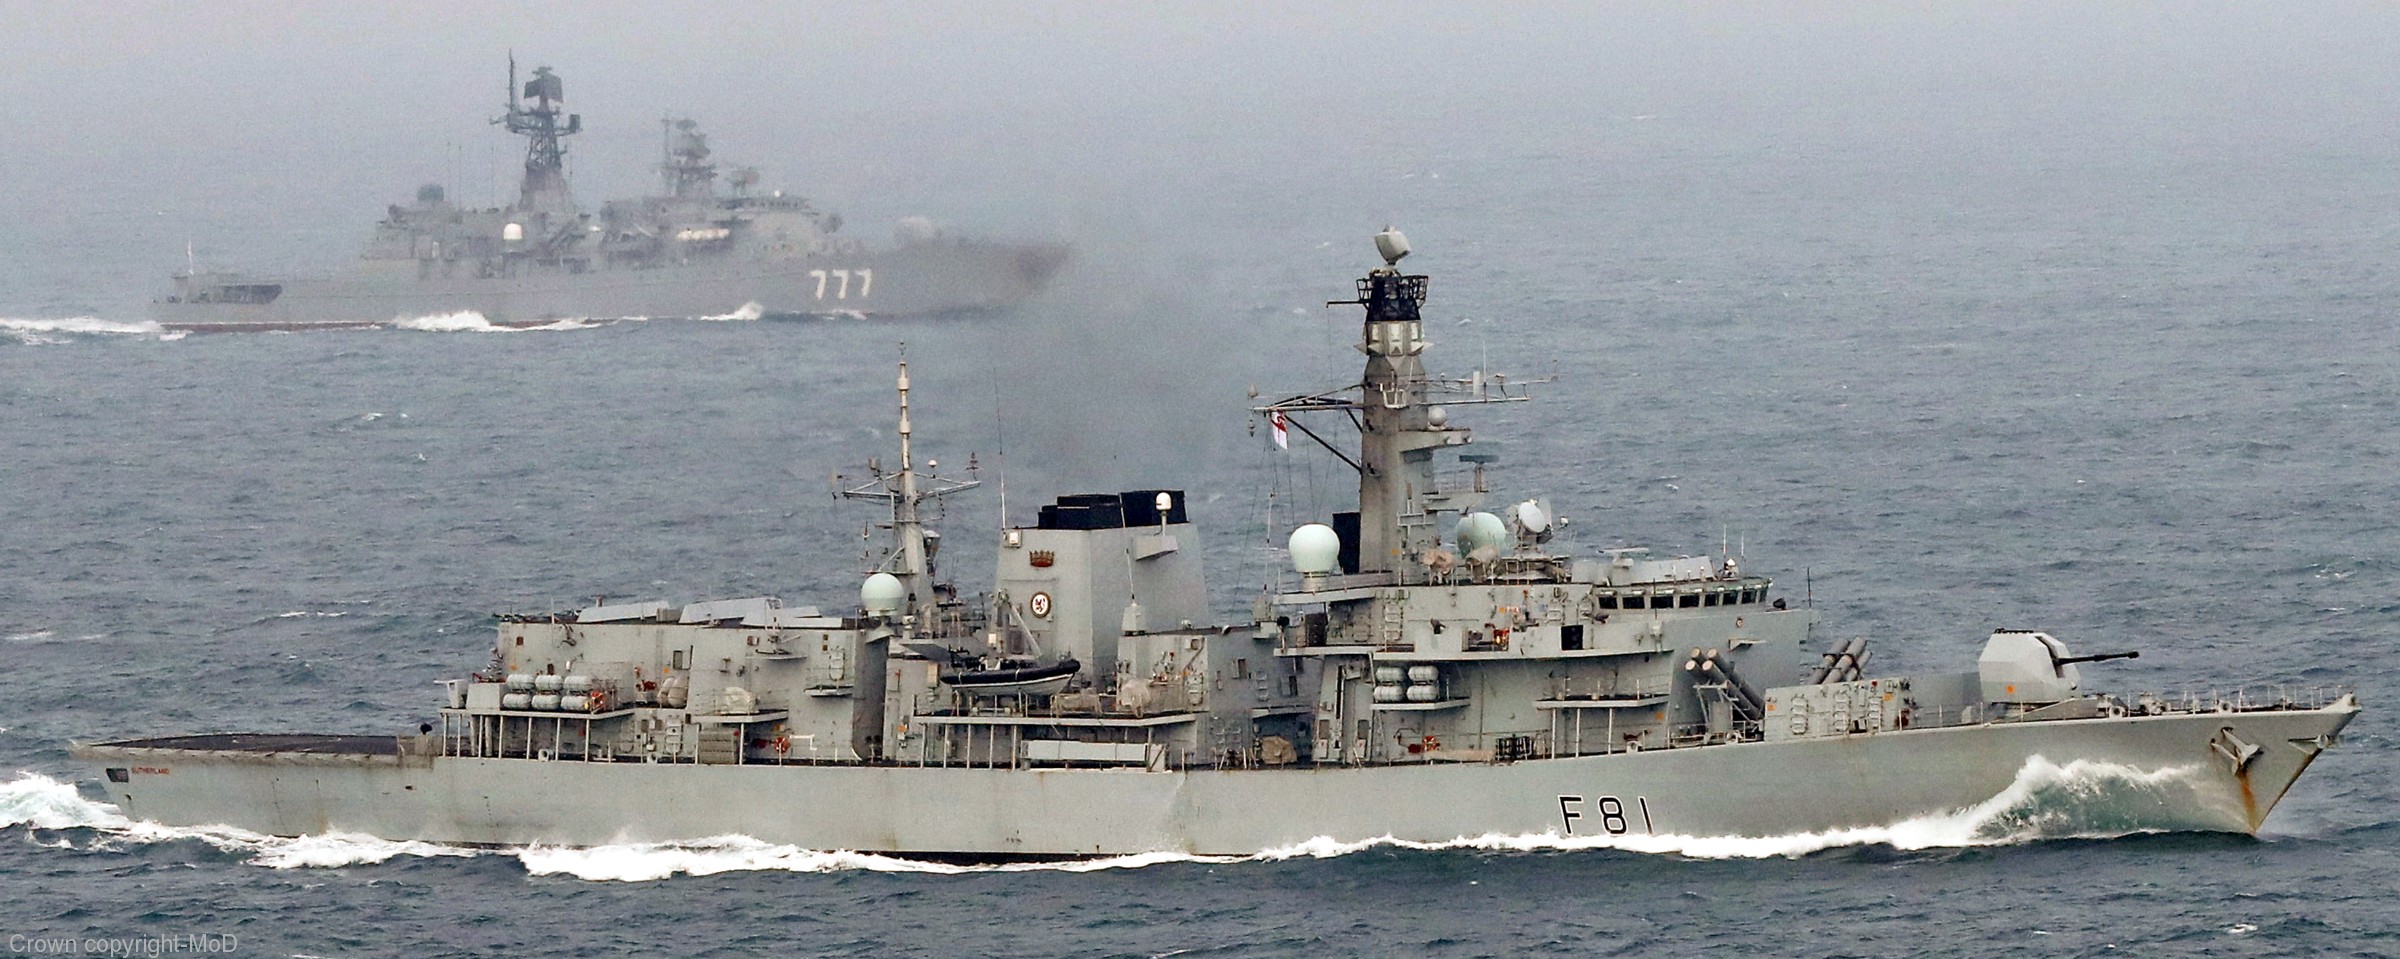 f-81 hms sutherland type 23 duke class guided missile frigate ffg royal navy 08